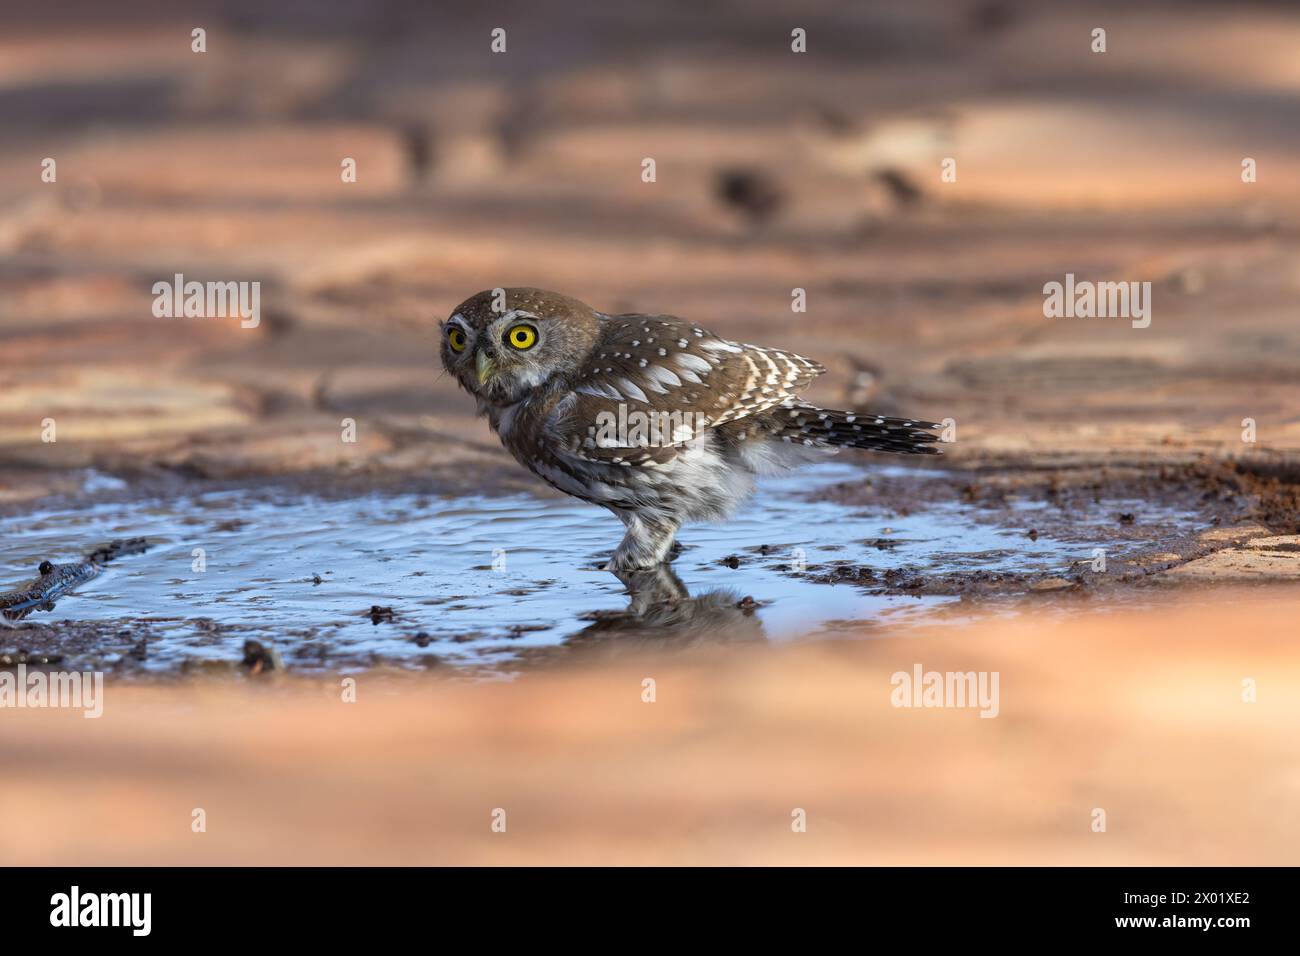 Pearl-spotted owlet (Glaucidium perlatum) at water, Kgalagadi transfrontier park, Northern Cape, South Africa Stock Photo